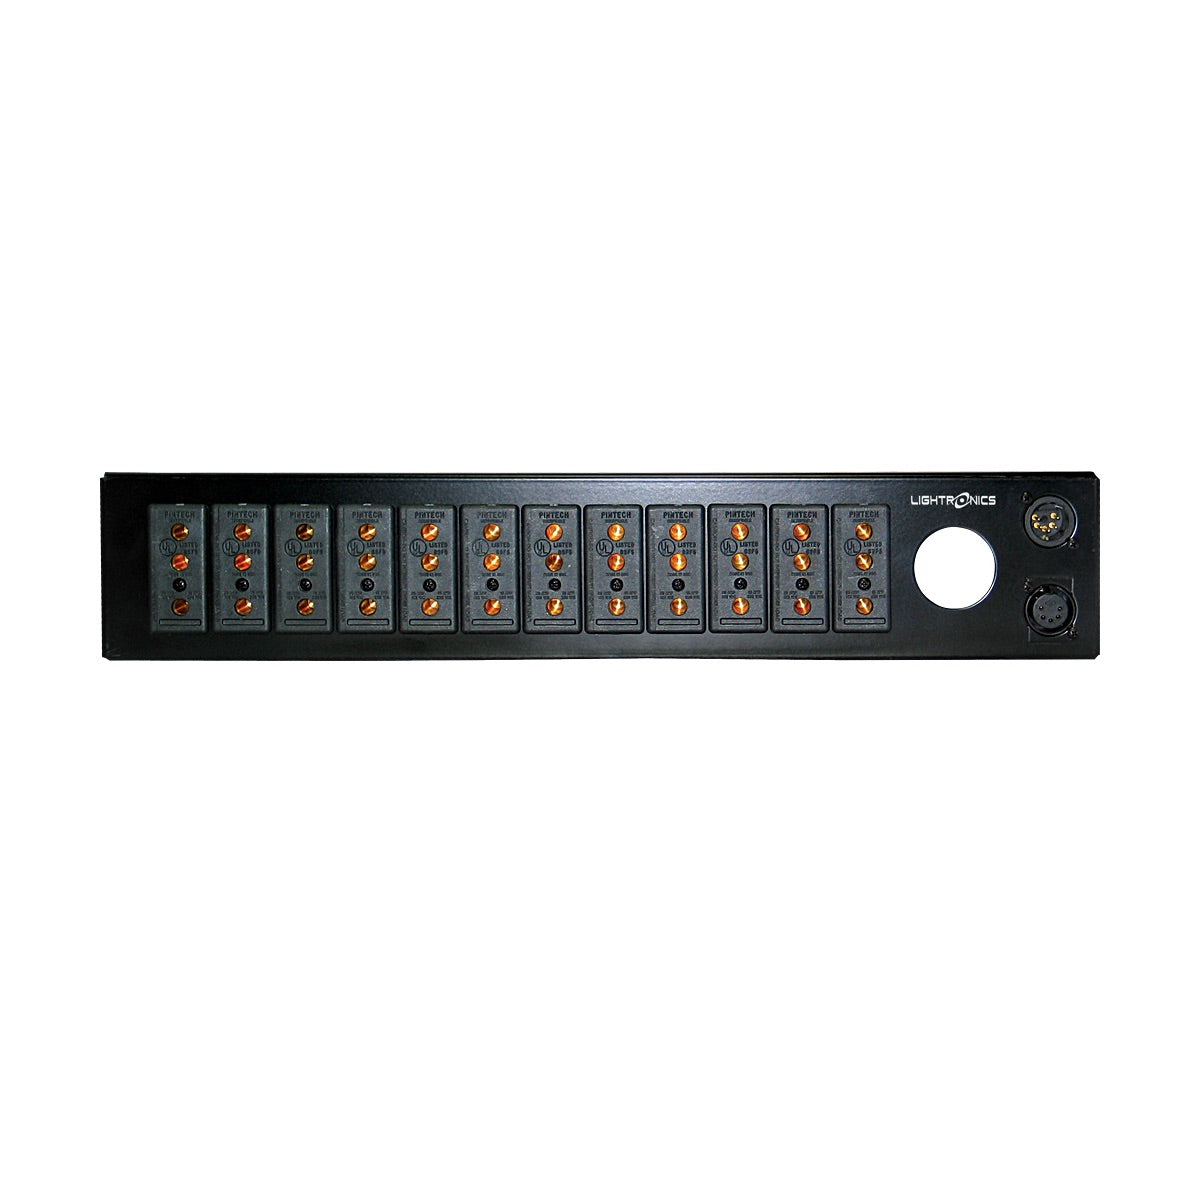 Lightronics RE121D Rack Mount Dimmer, RE Series, rear Stagepin Outlet Panel